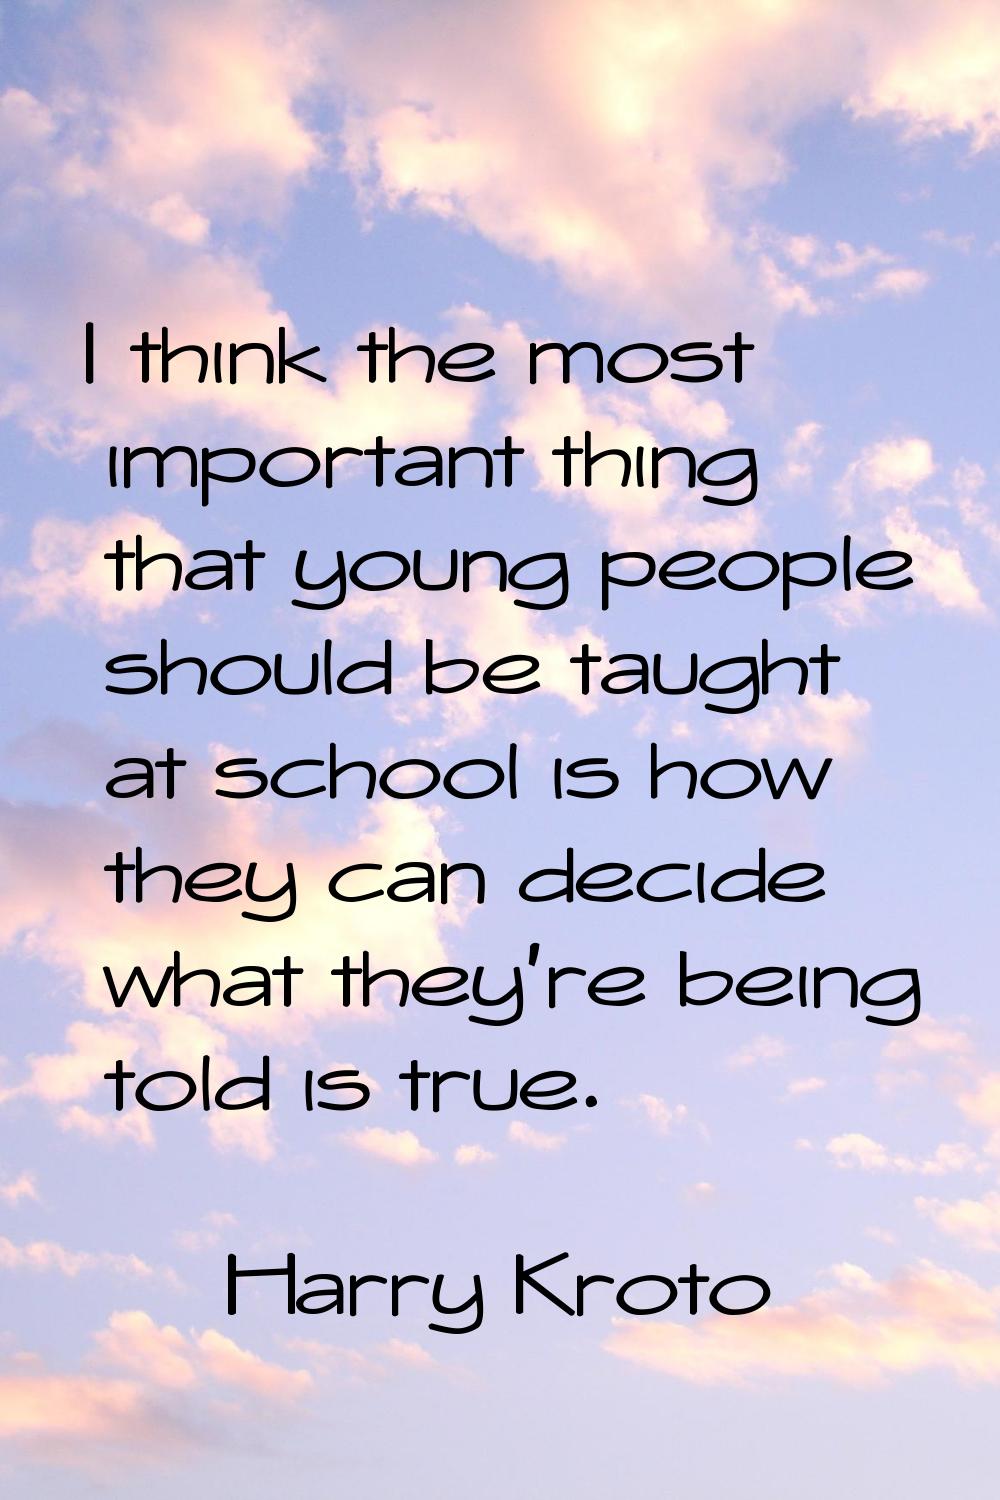 I think the most important thing that young people should be taught at school is how they can decid